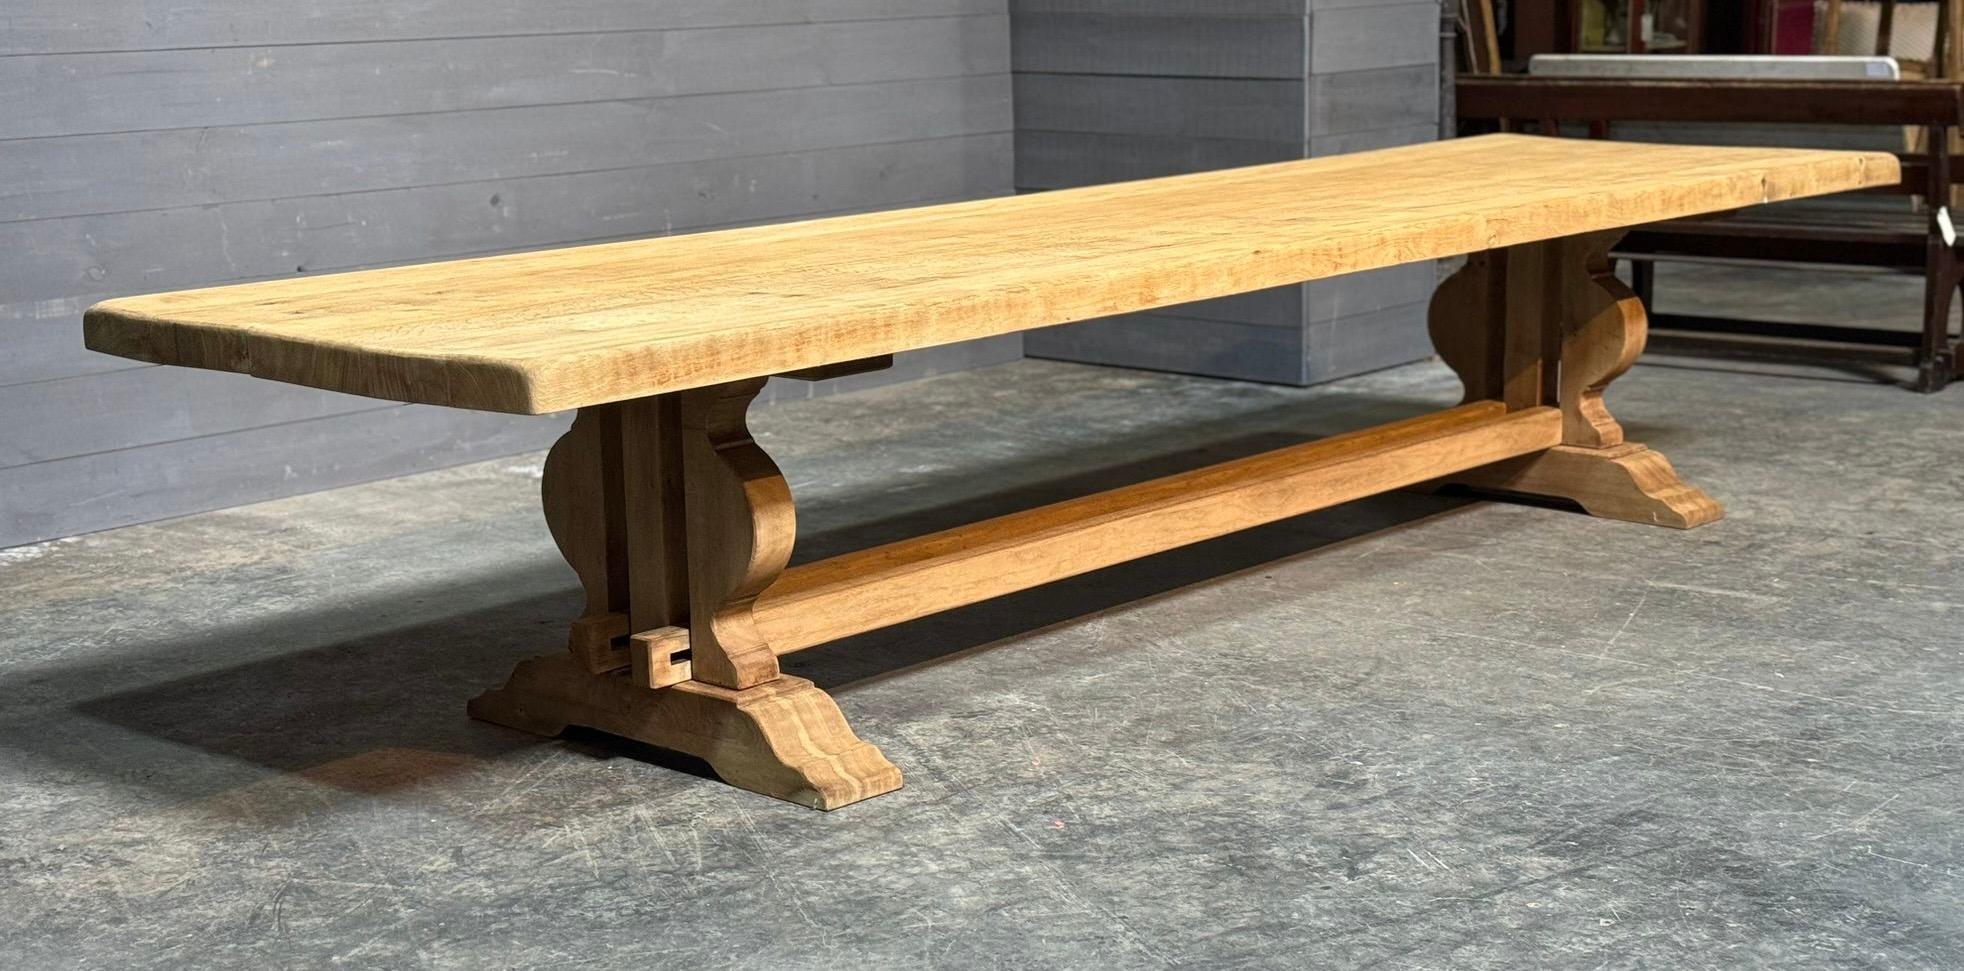 We are very pleased to offer the largest French Trestle Solid Oak Farmhouse Dining Table we have ever seen. At 4 meters long and 106 cm deep this table is incredible and the top is incredibly heavy !!!
Dating to the early 1900s and of excellent